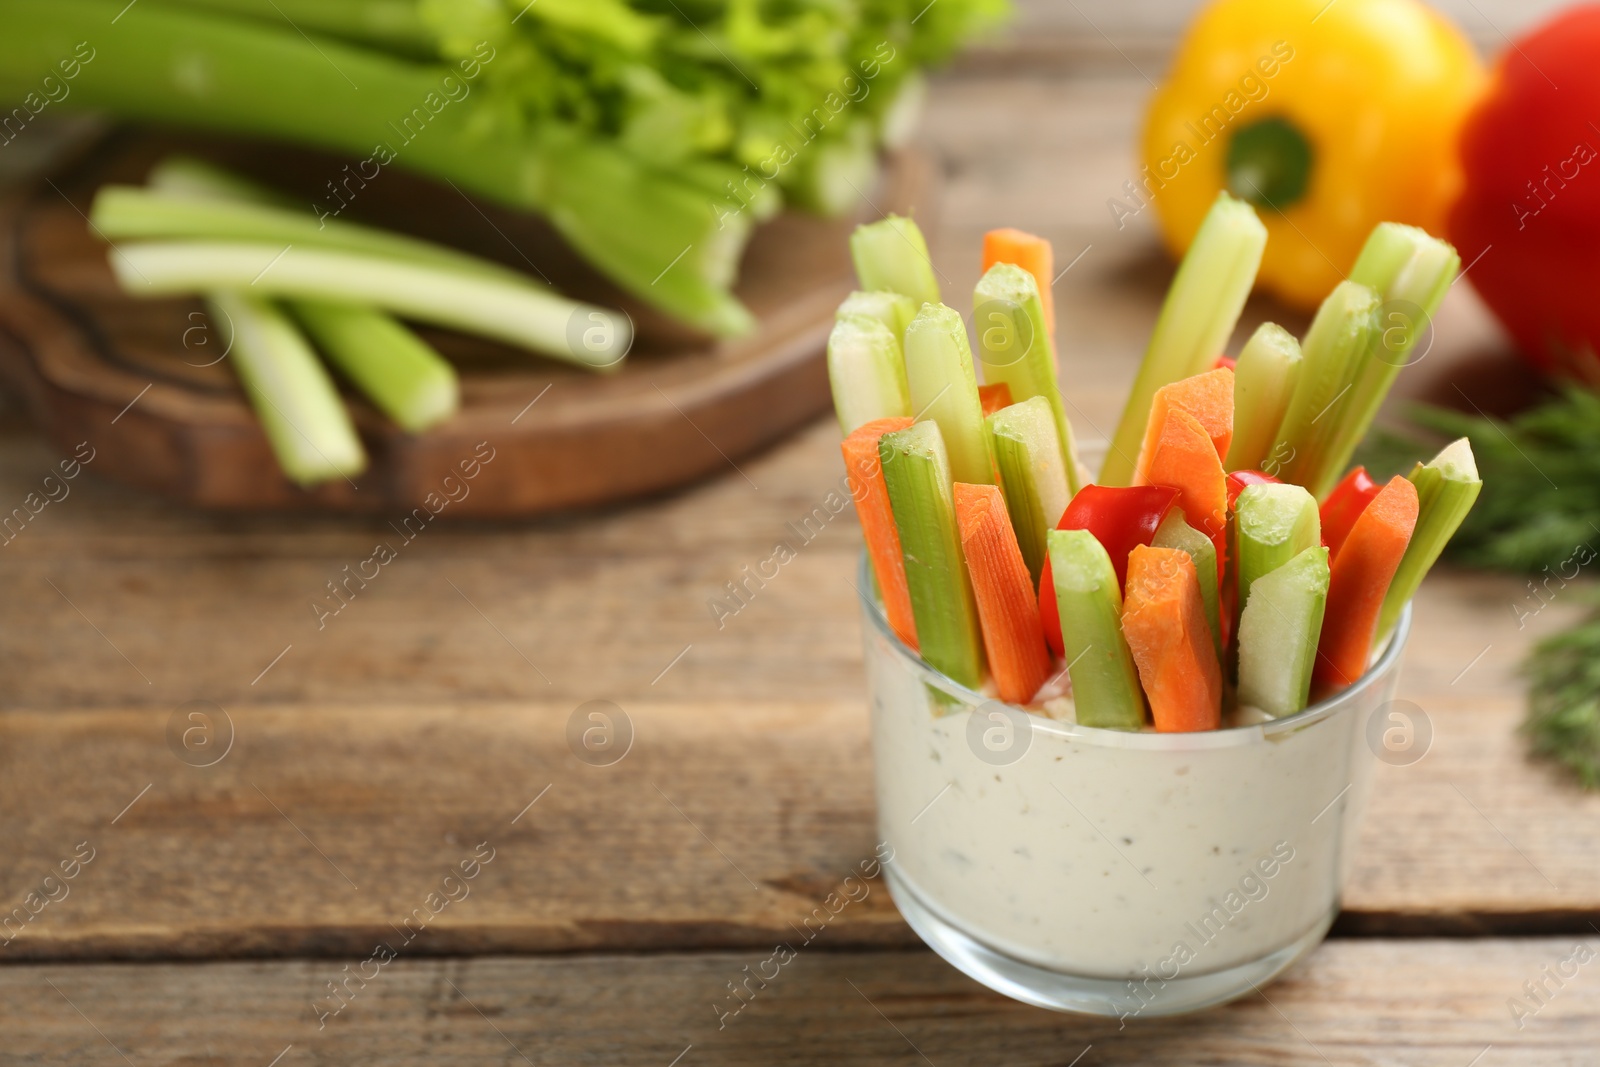 Photo of Celery and other vegetable sticks with dip sauce in glass bowl on wooden table. Space for text